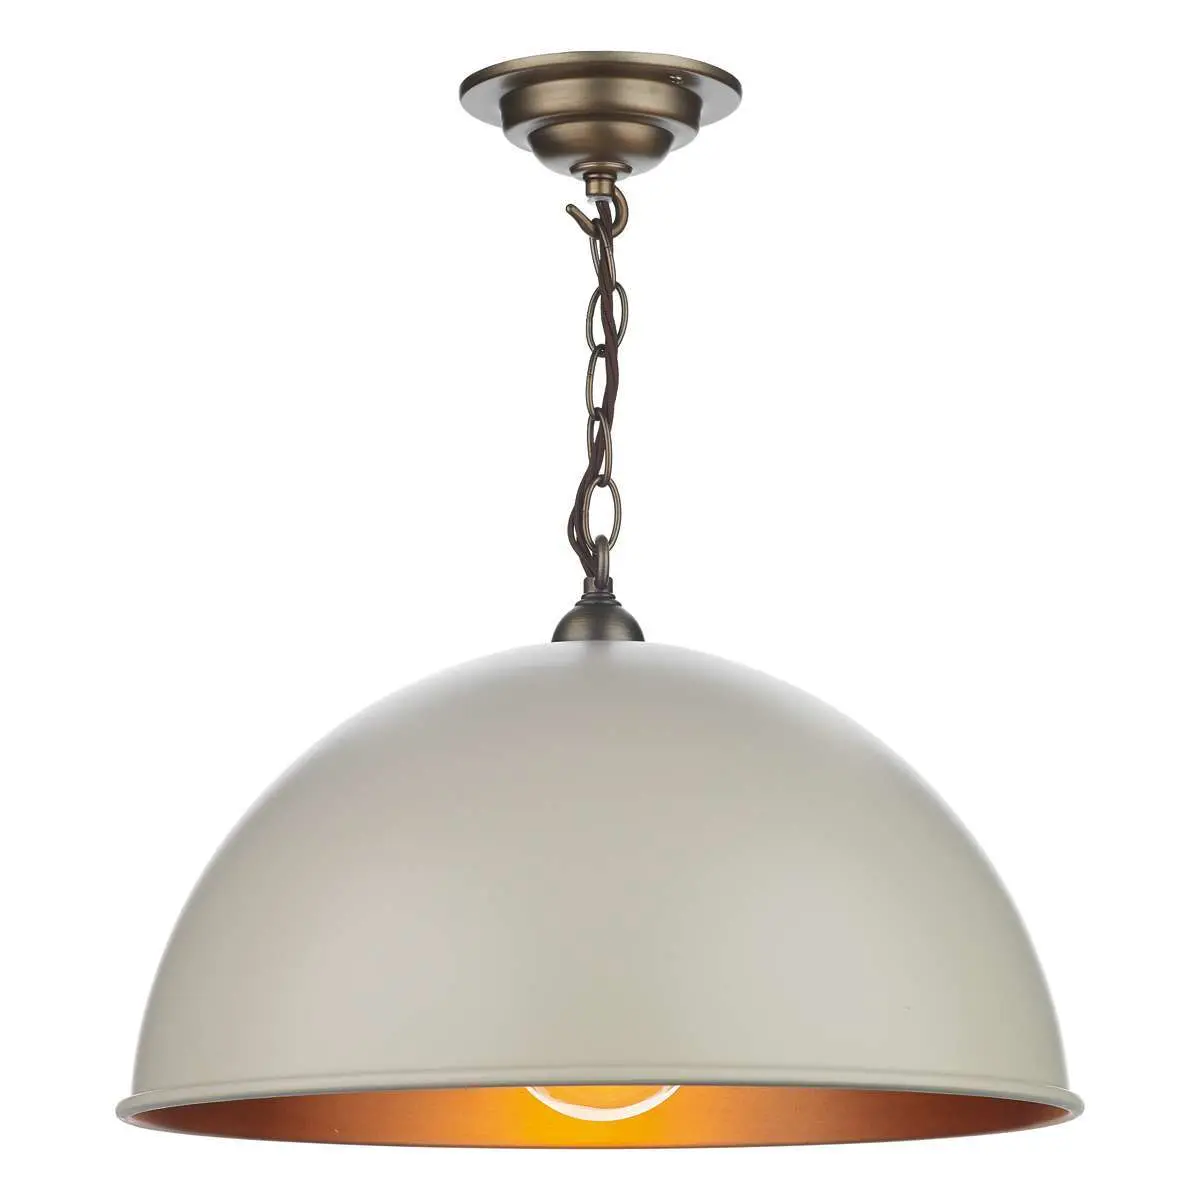 Ealing Small Pendant in Cotswold Cream